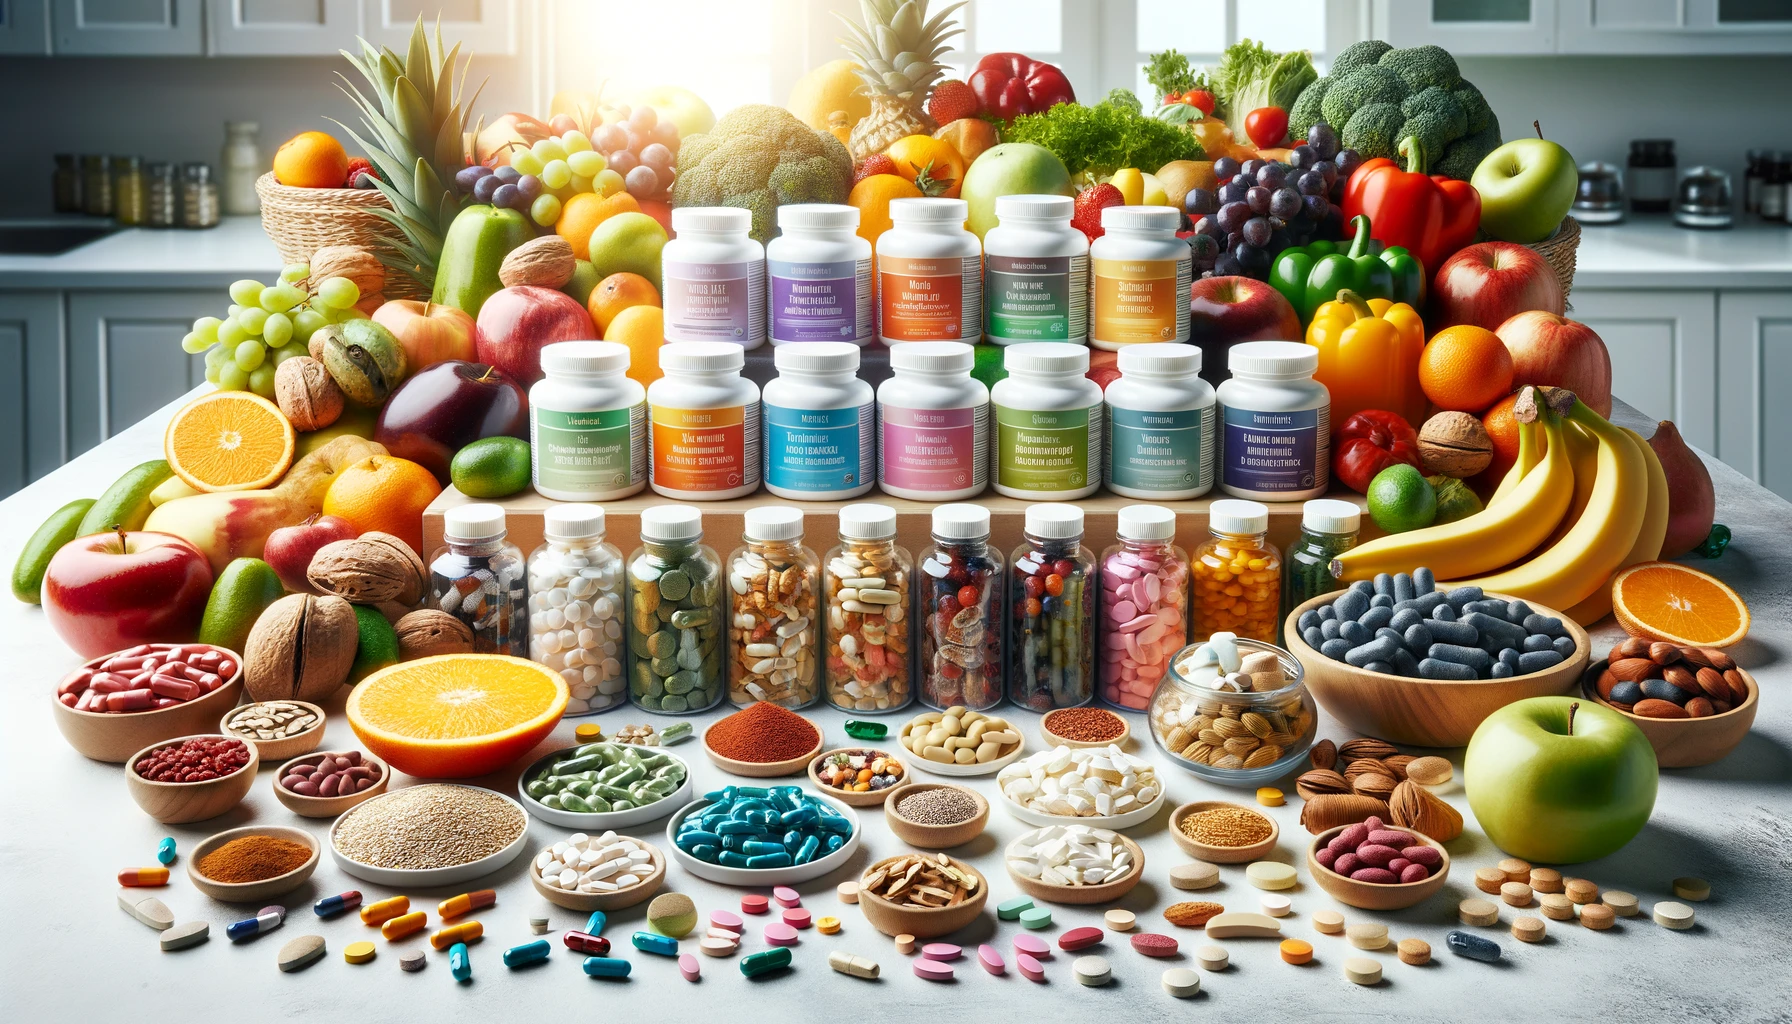 Various nutritional supplements in pill form are arrayed with labels indicating their vitamin content, surrounded by a selection of whole foods like fruits, vegetables, nuts, and seeds on a bright kitchen counter.